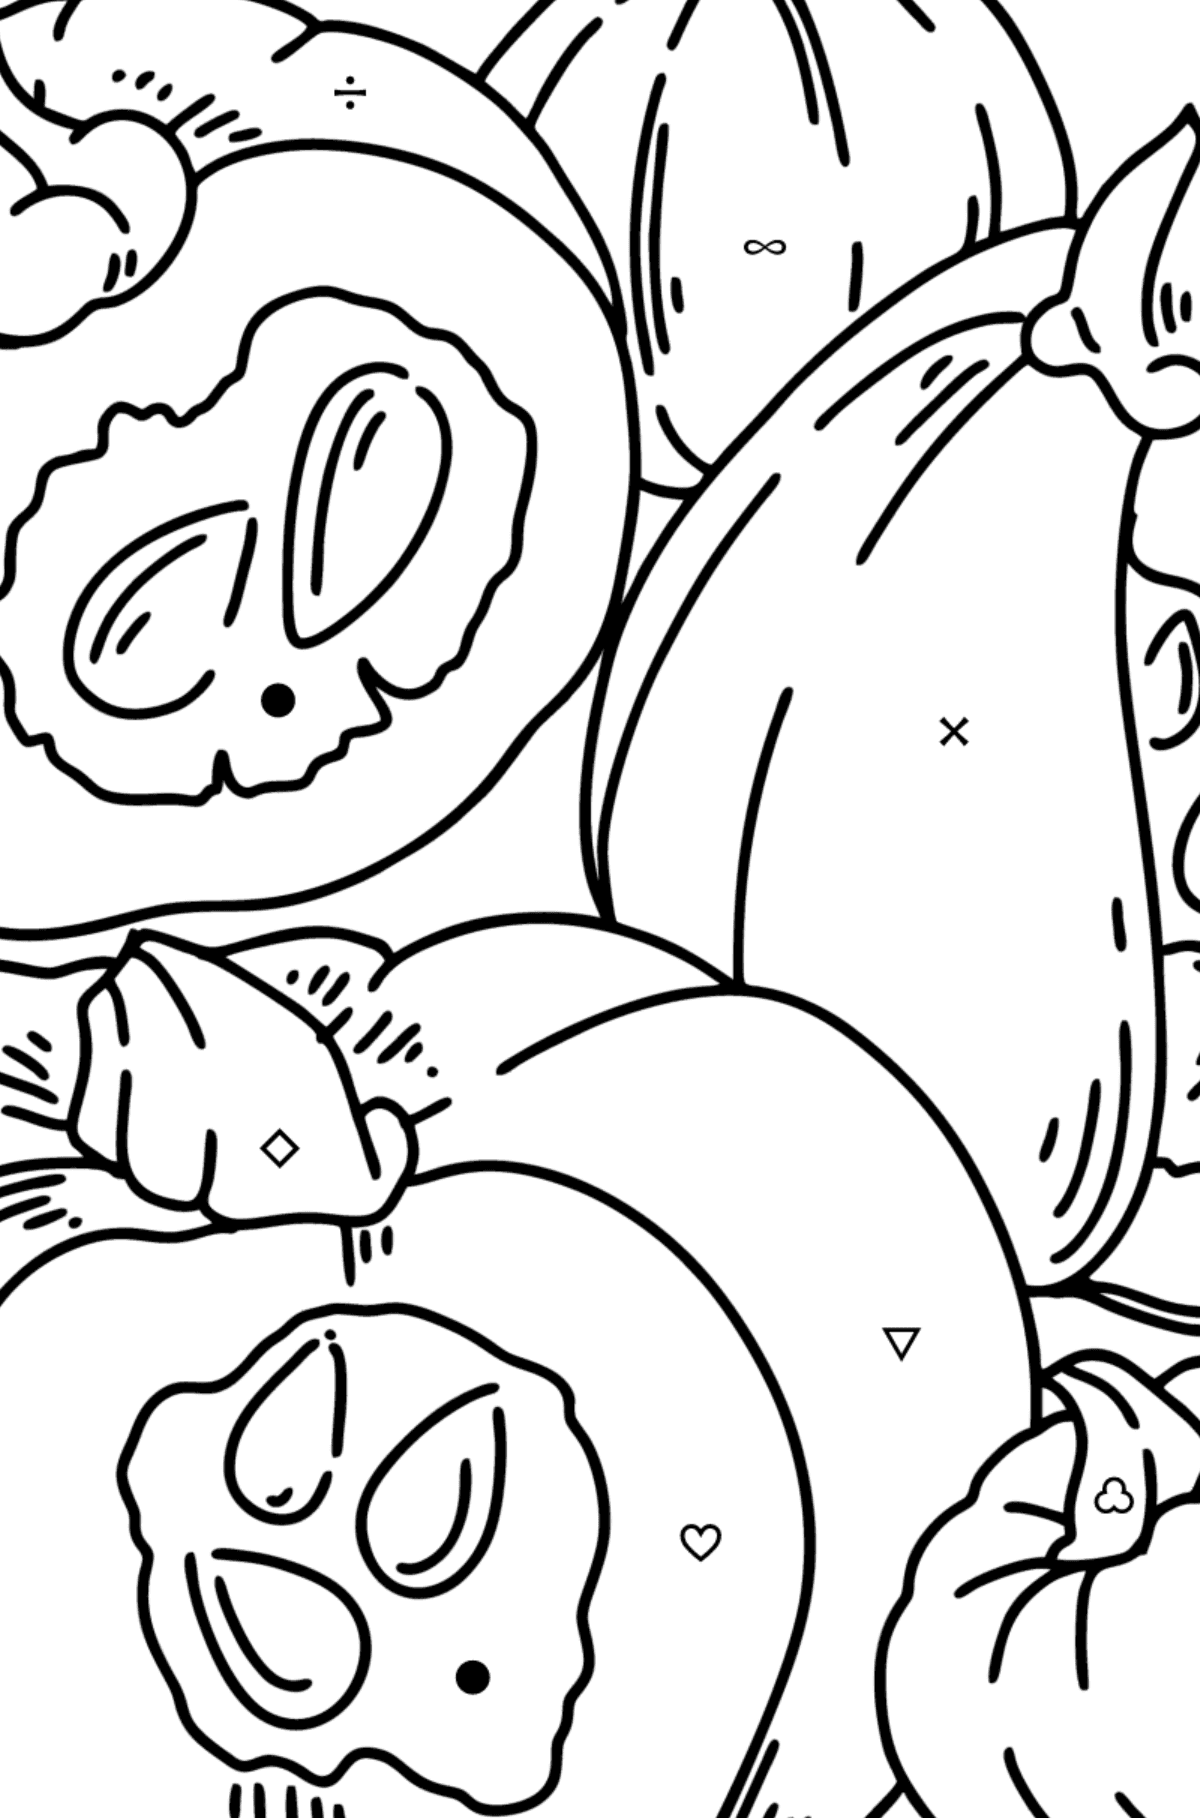 Coloring page Autumn - Pumpkin harvest - Coloring by Symbols and Geometric Shapes for Kids